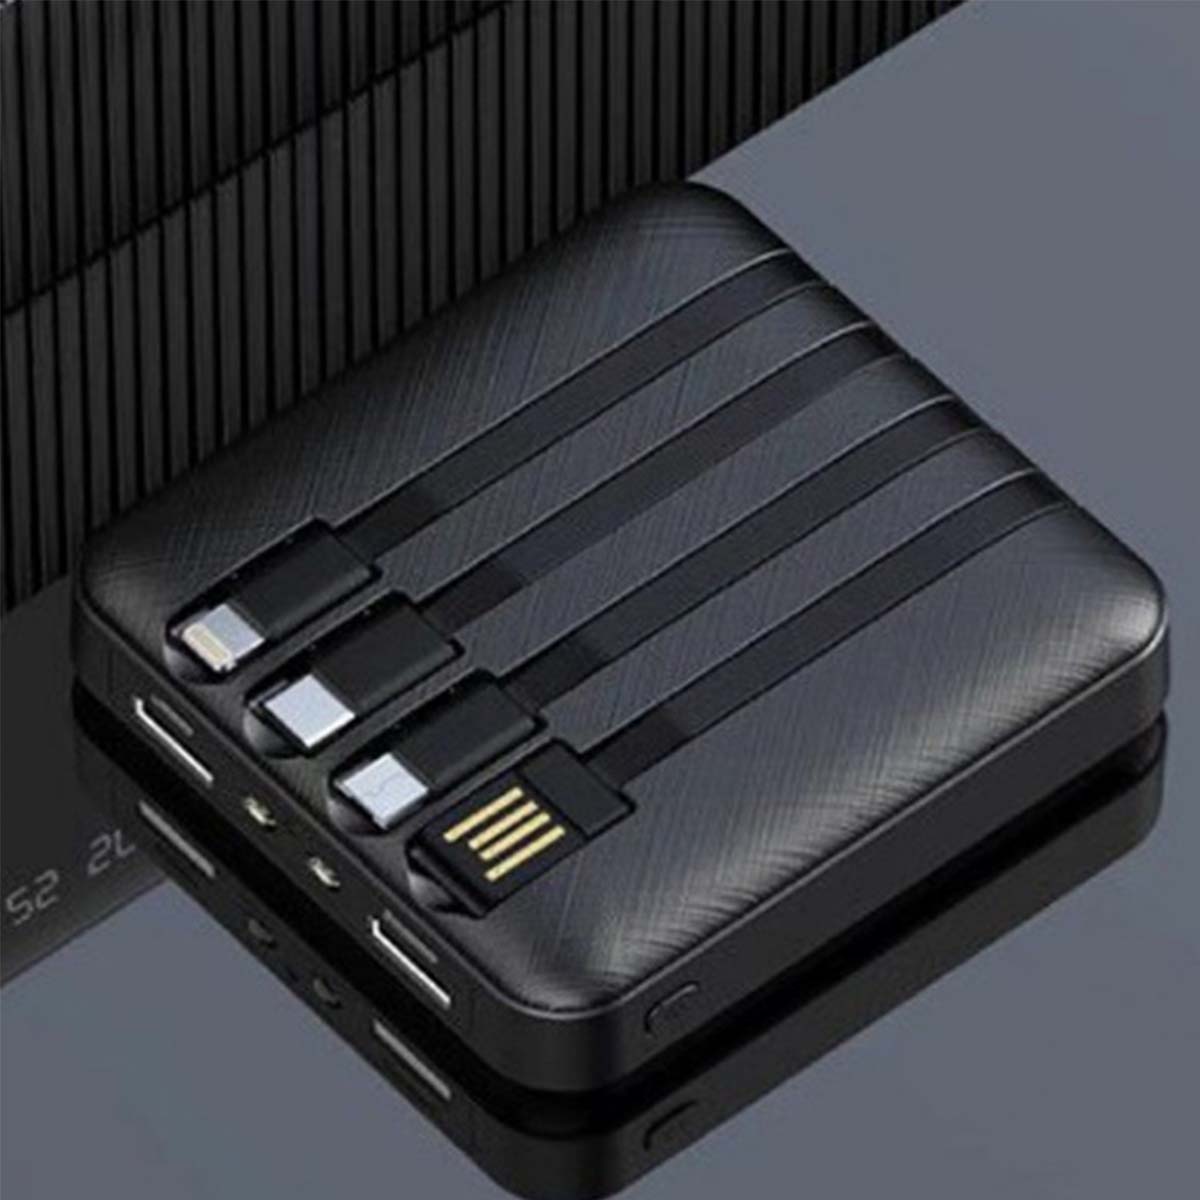 Mini Power Bank with 4 Built in Cables, External Battery Power Pack